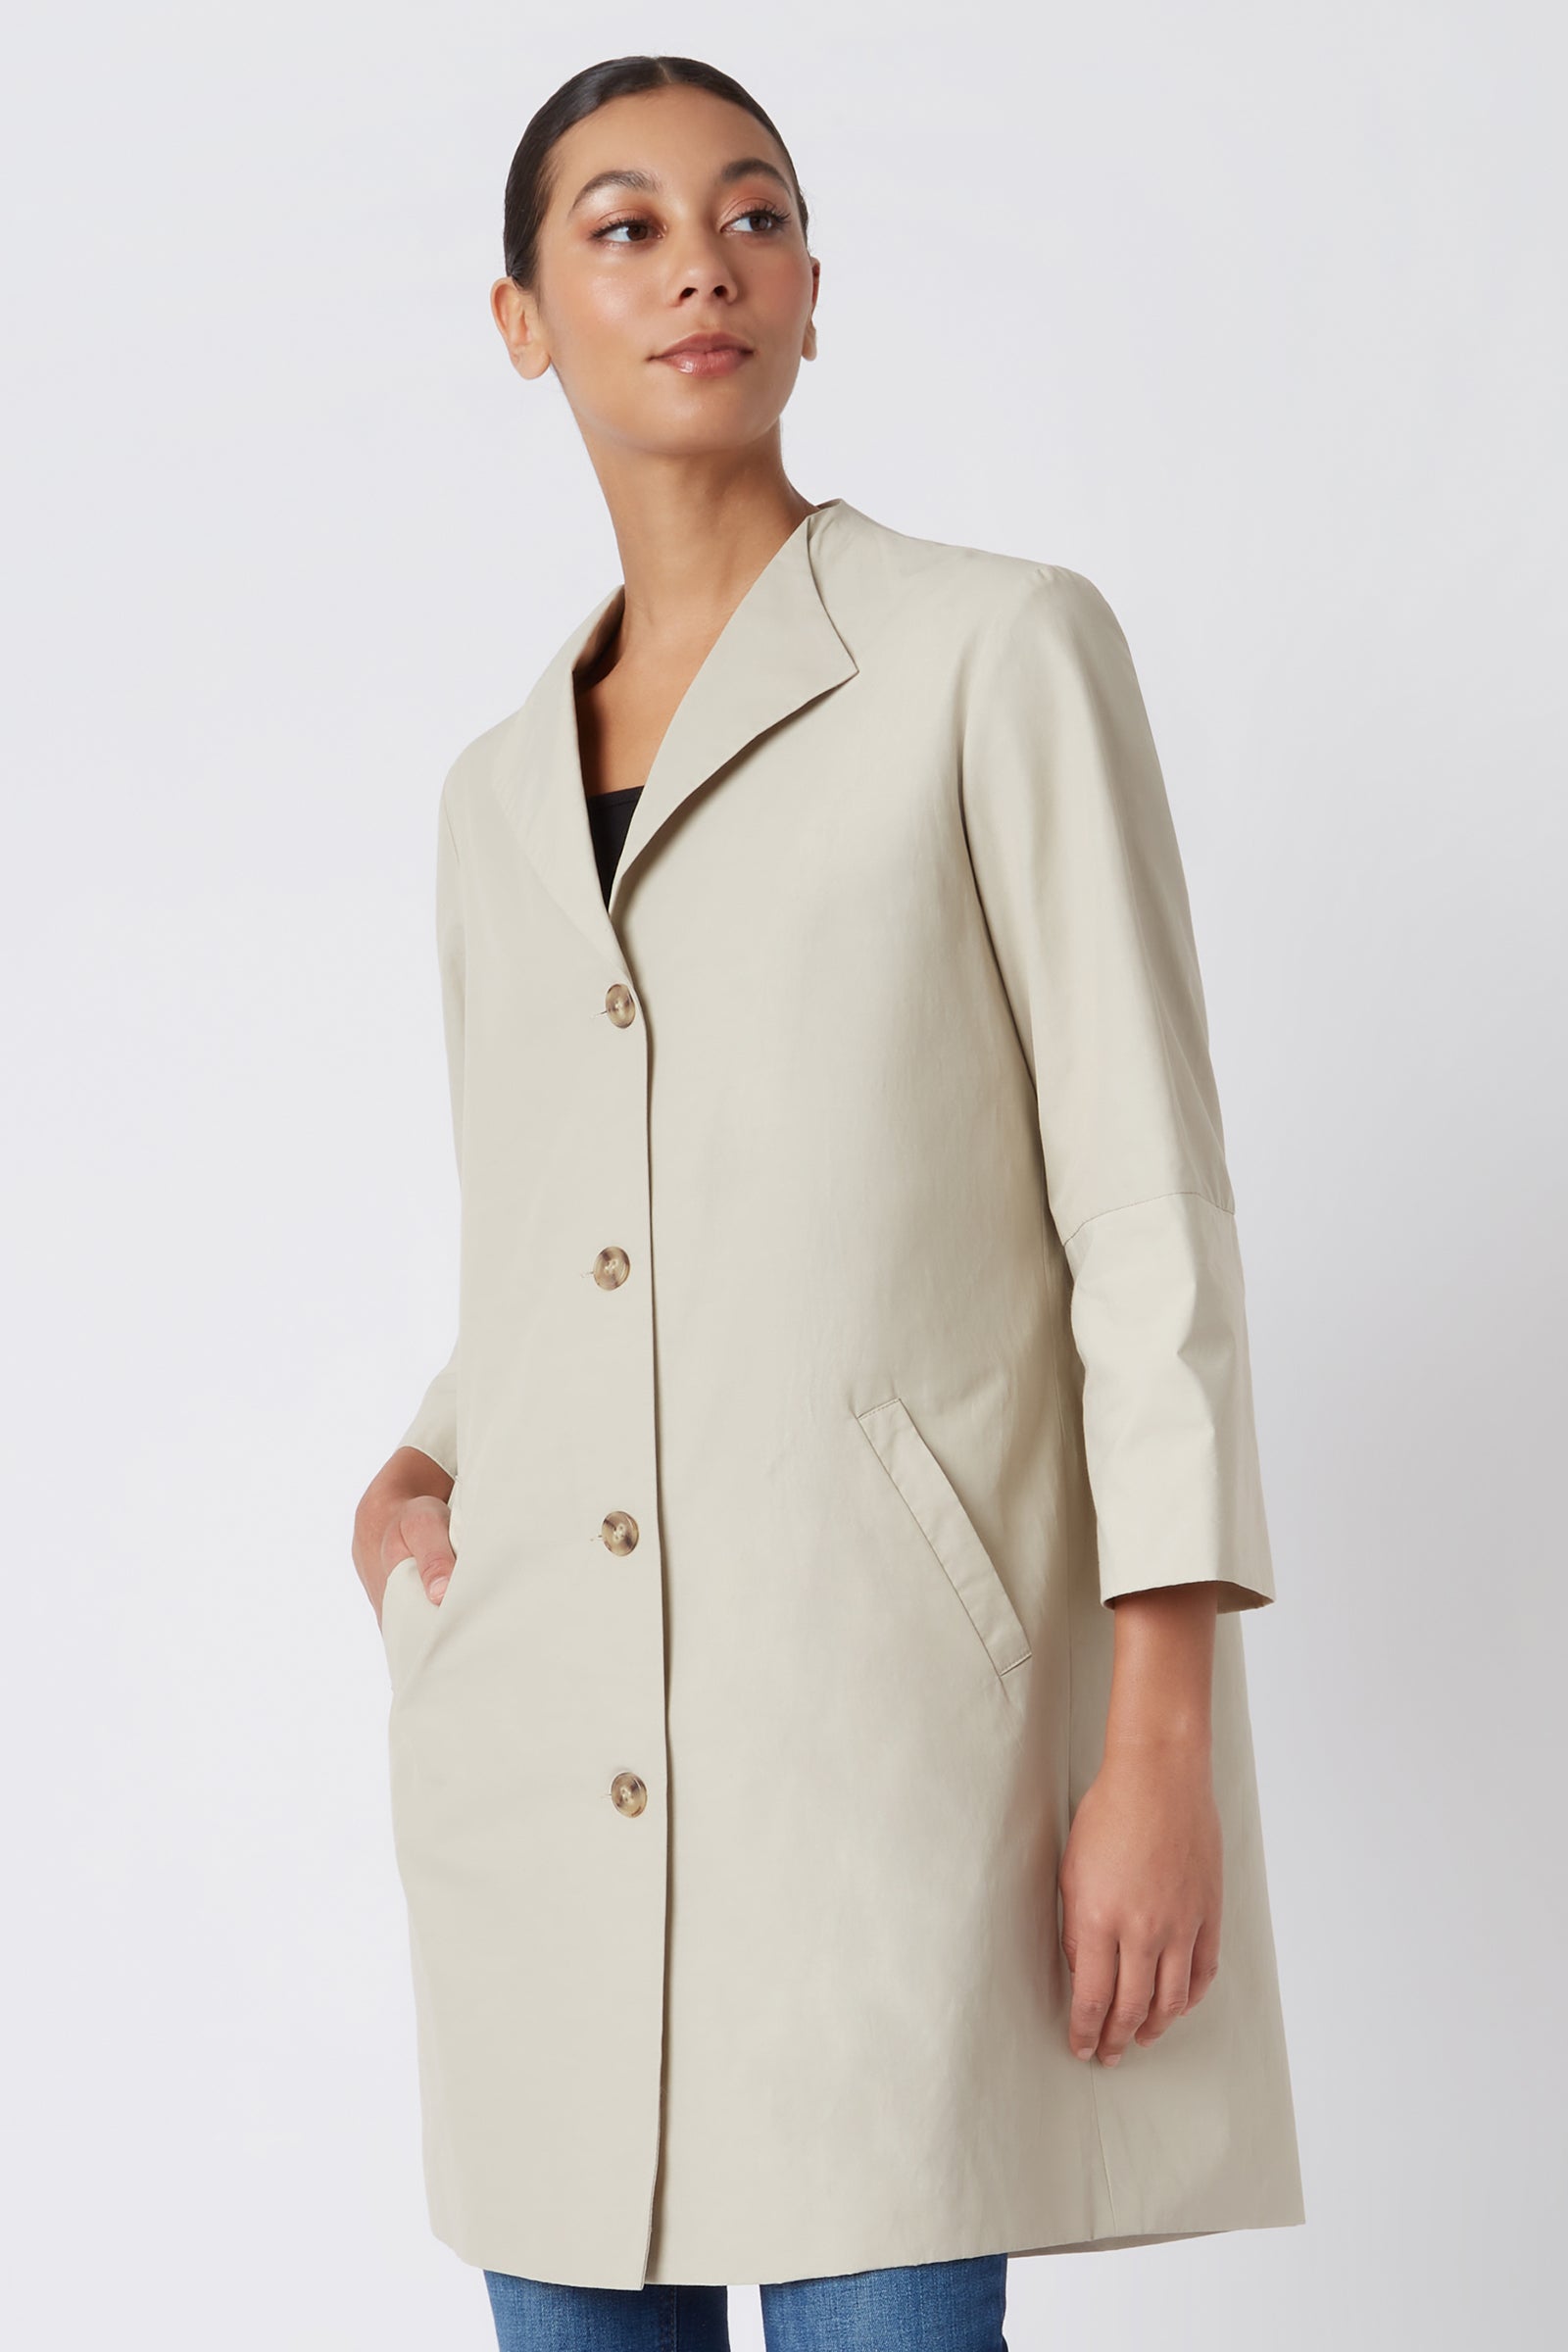 Kal Rieman Else Peacoat in Classic Khaki on Model with Hand in Pocket Cropped Front View